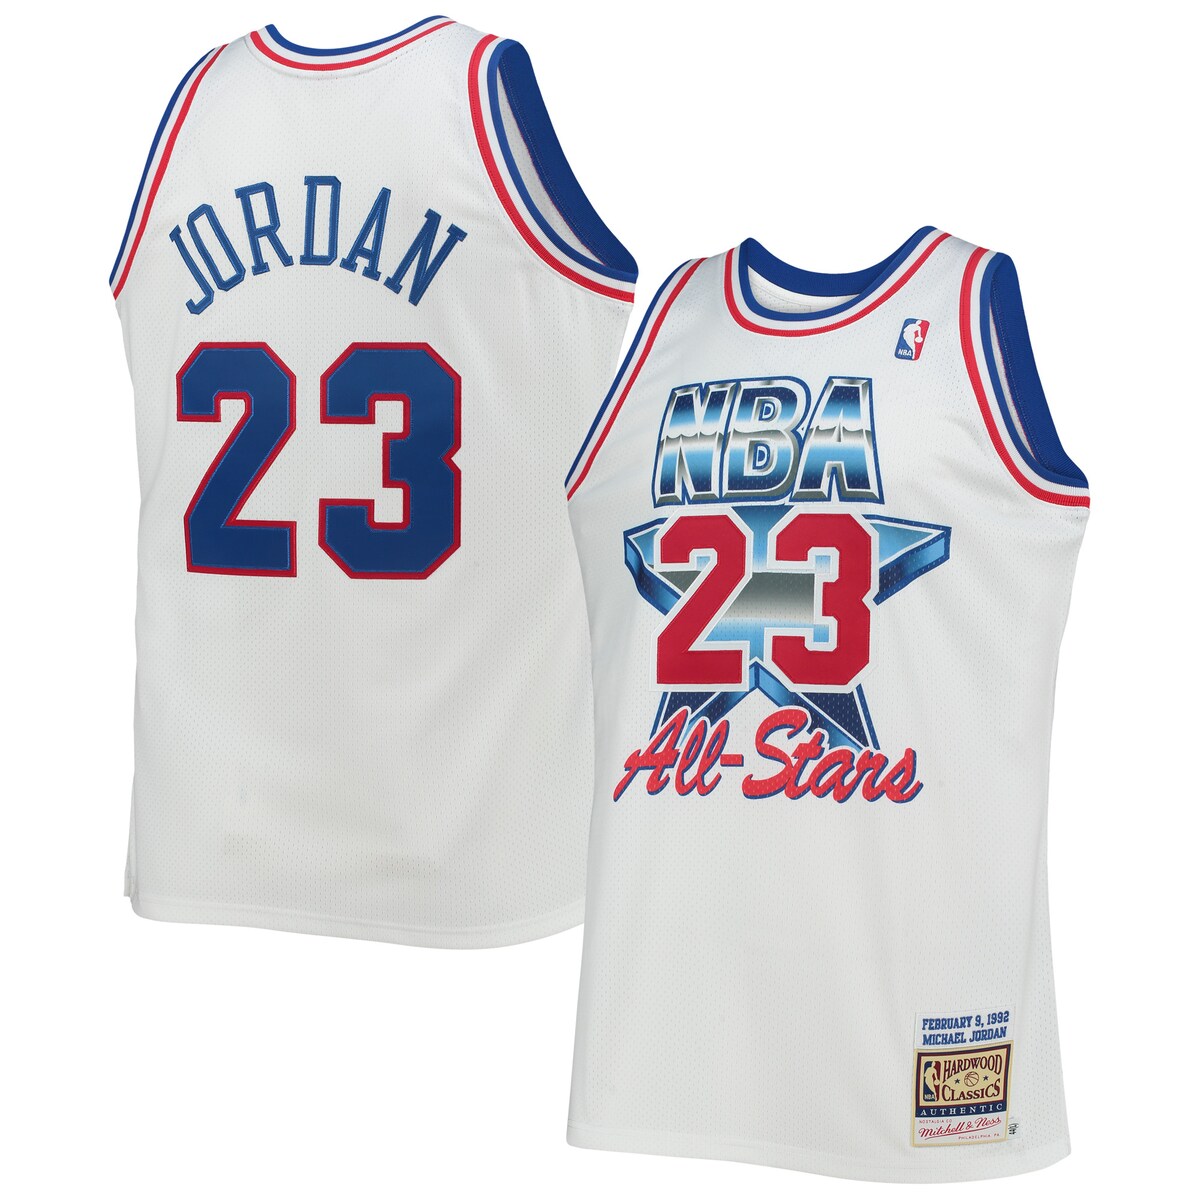 Pay tribute to your all-time favorite NBA star with this Eastern Conference Hardwood Classics 1992 All-Star Game Authentic jersey from Mitchell & Ness. Its throwback design is constructed to identical standards as the uniform Michael Jordan wore during his unforgettable performance in the game. This jersey's remarkably detailed graphics and high-quality stitching help bring back all those cherished memories of watching him lead the Eastern Conference.Machine wash, line dryAuthentic JerseyBrand: Mitchell & NessSide splits at hemMaterial: 100% PolyesterOfficially licensedSleevelessImportedTackle twill appliqueWoven jock tag at hemSublimated designCrew neck